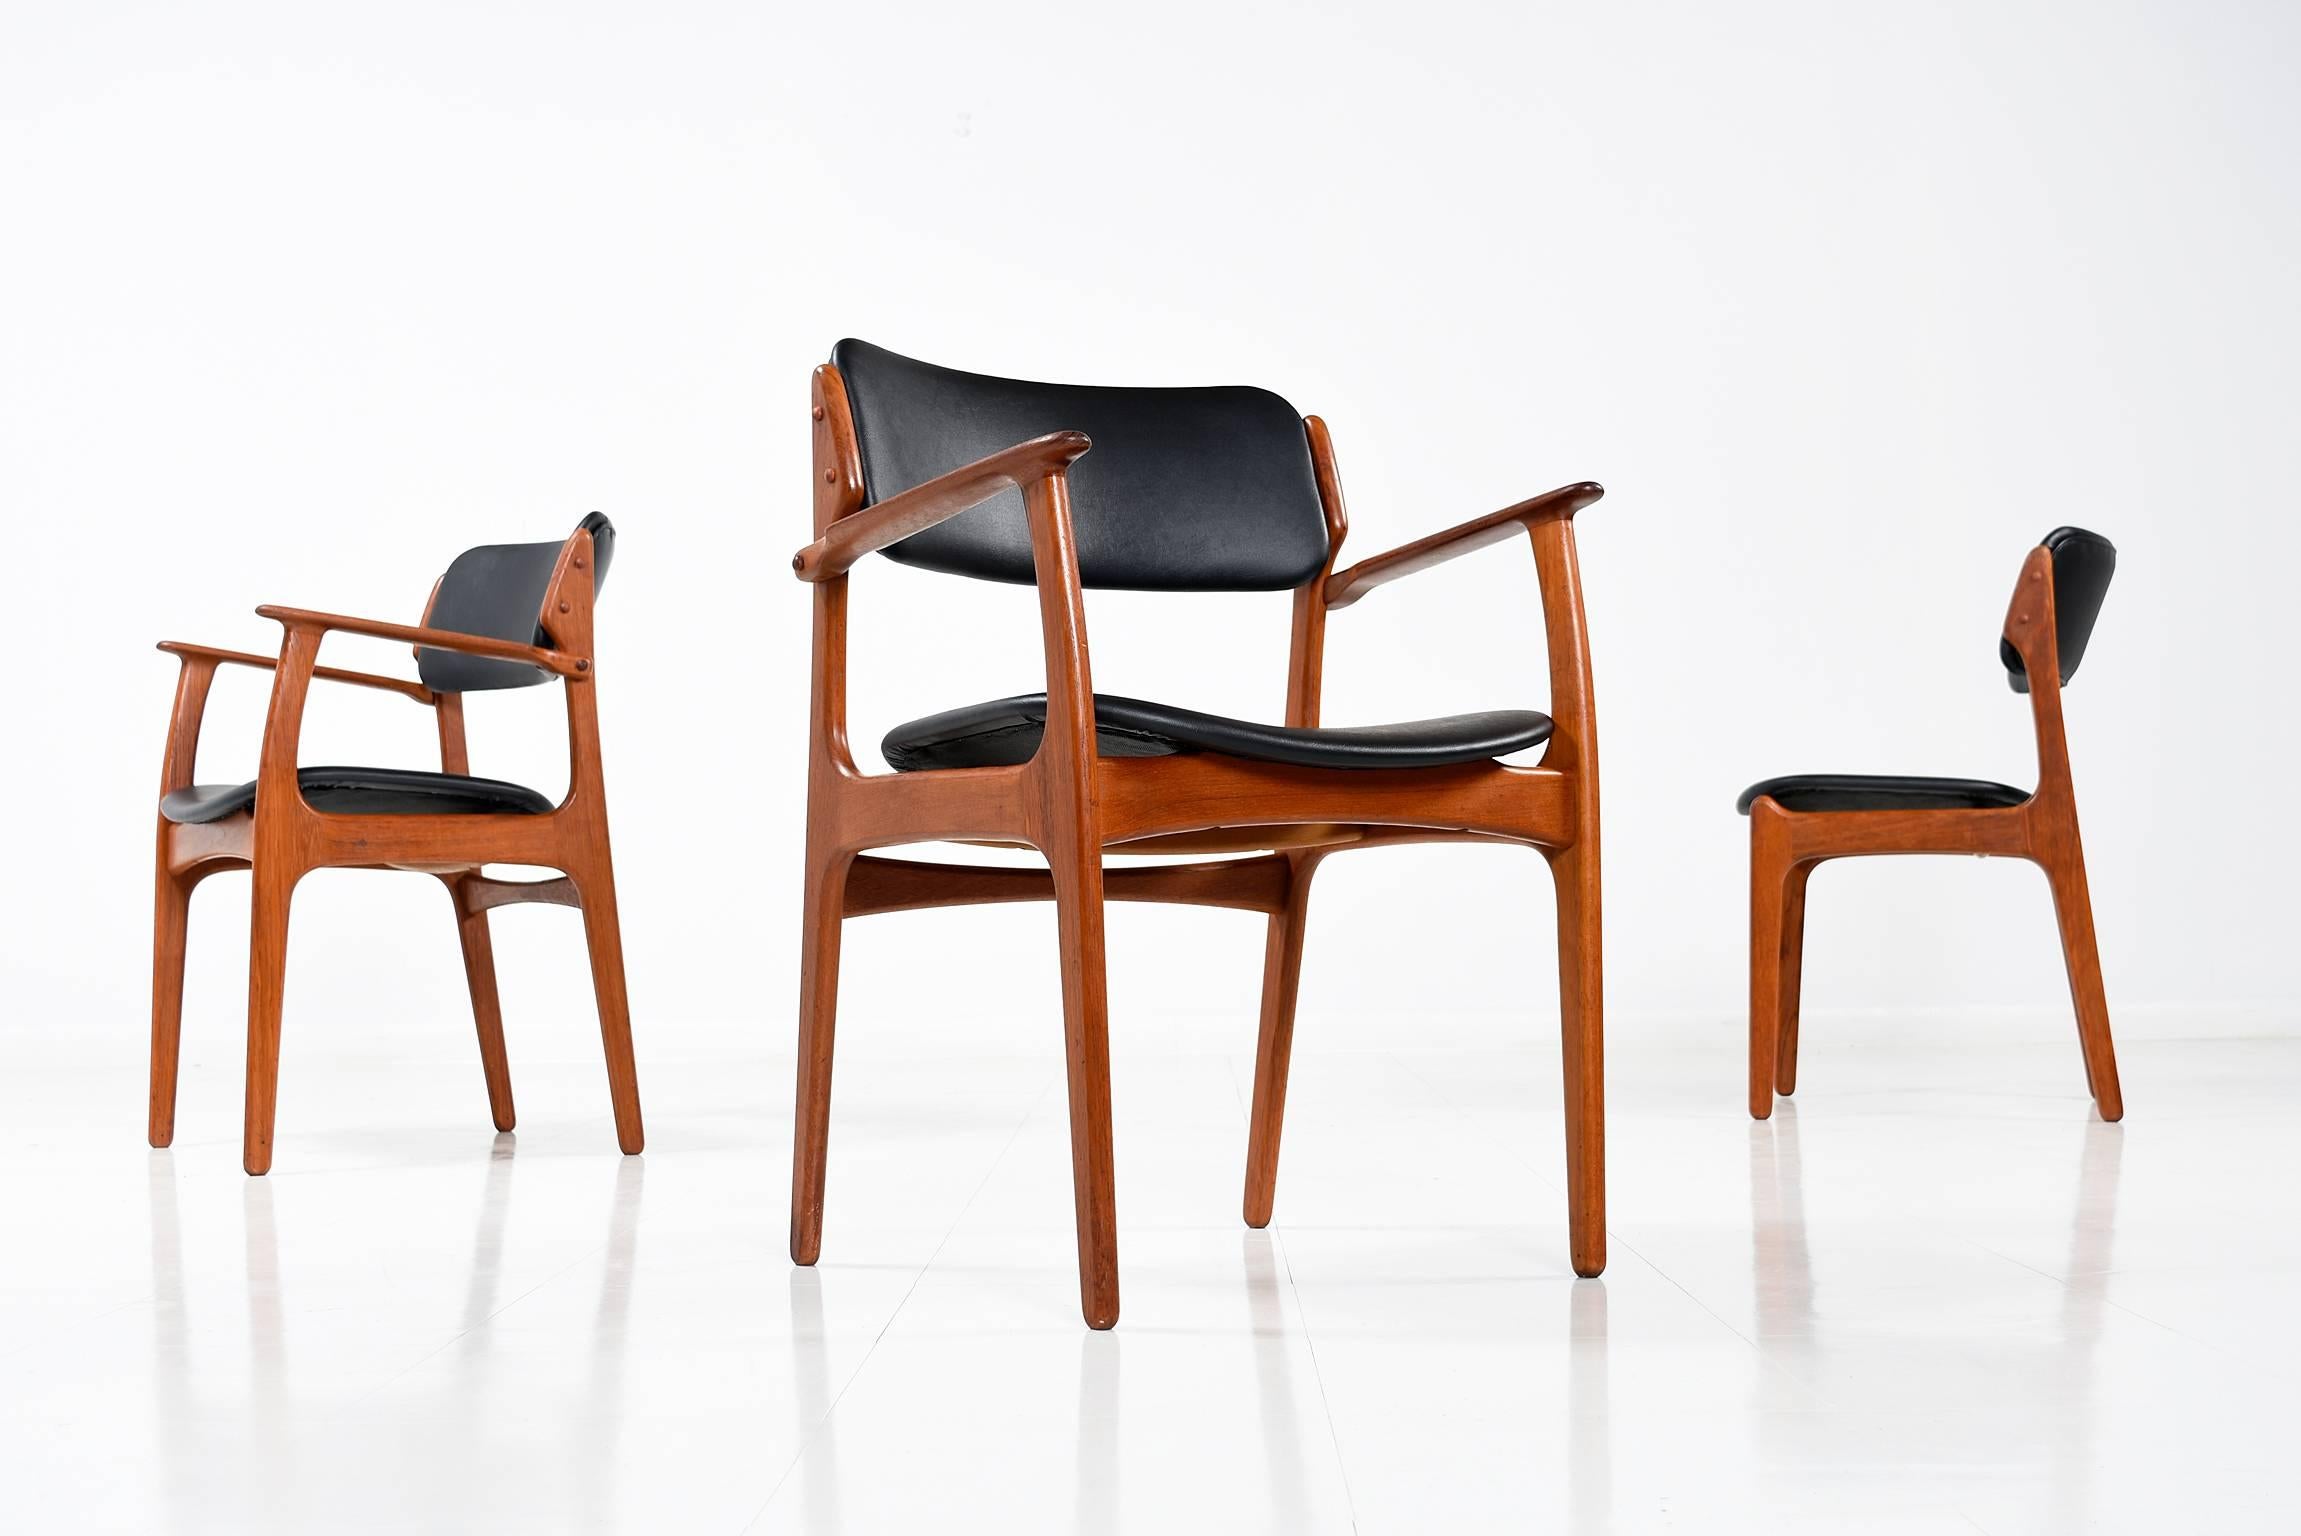 Gorgeous set of four Eric Buck, model OD-49 for O.D. Møbler, 1960s. These Classic Scandinavian Modern dining chairs are made of a solid teak frame, beautifully crafted and designed, featuring elegant floating seats and a deep curved backrest. The